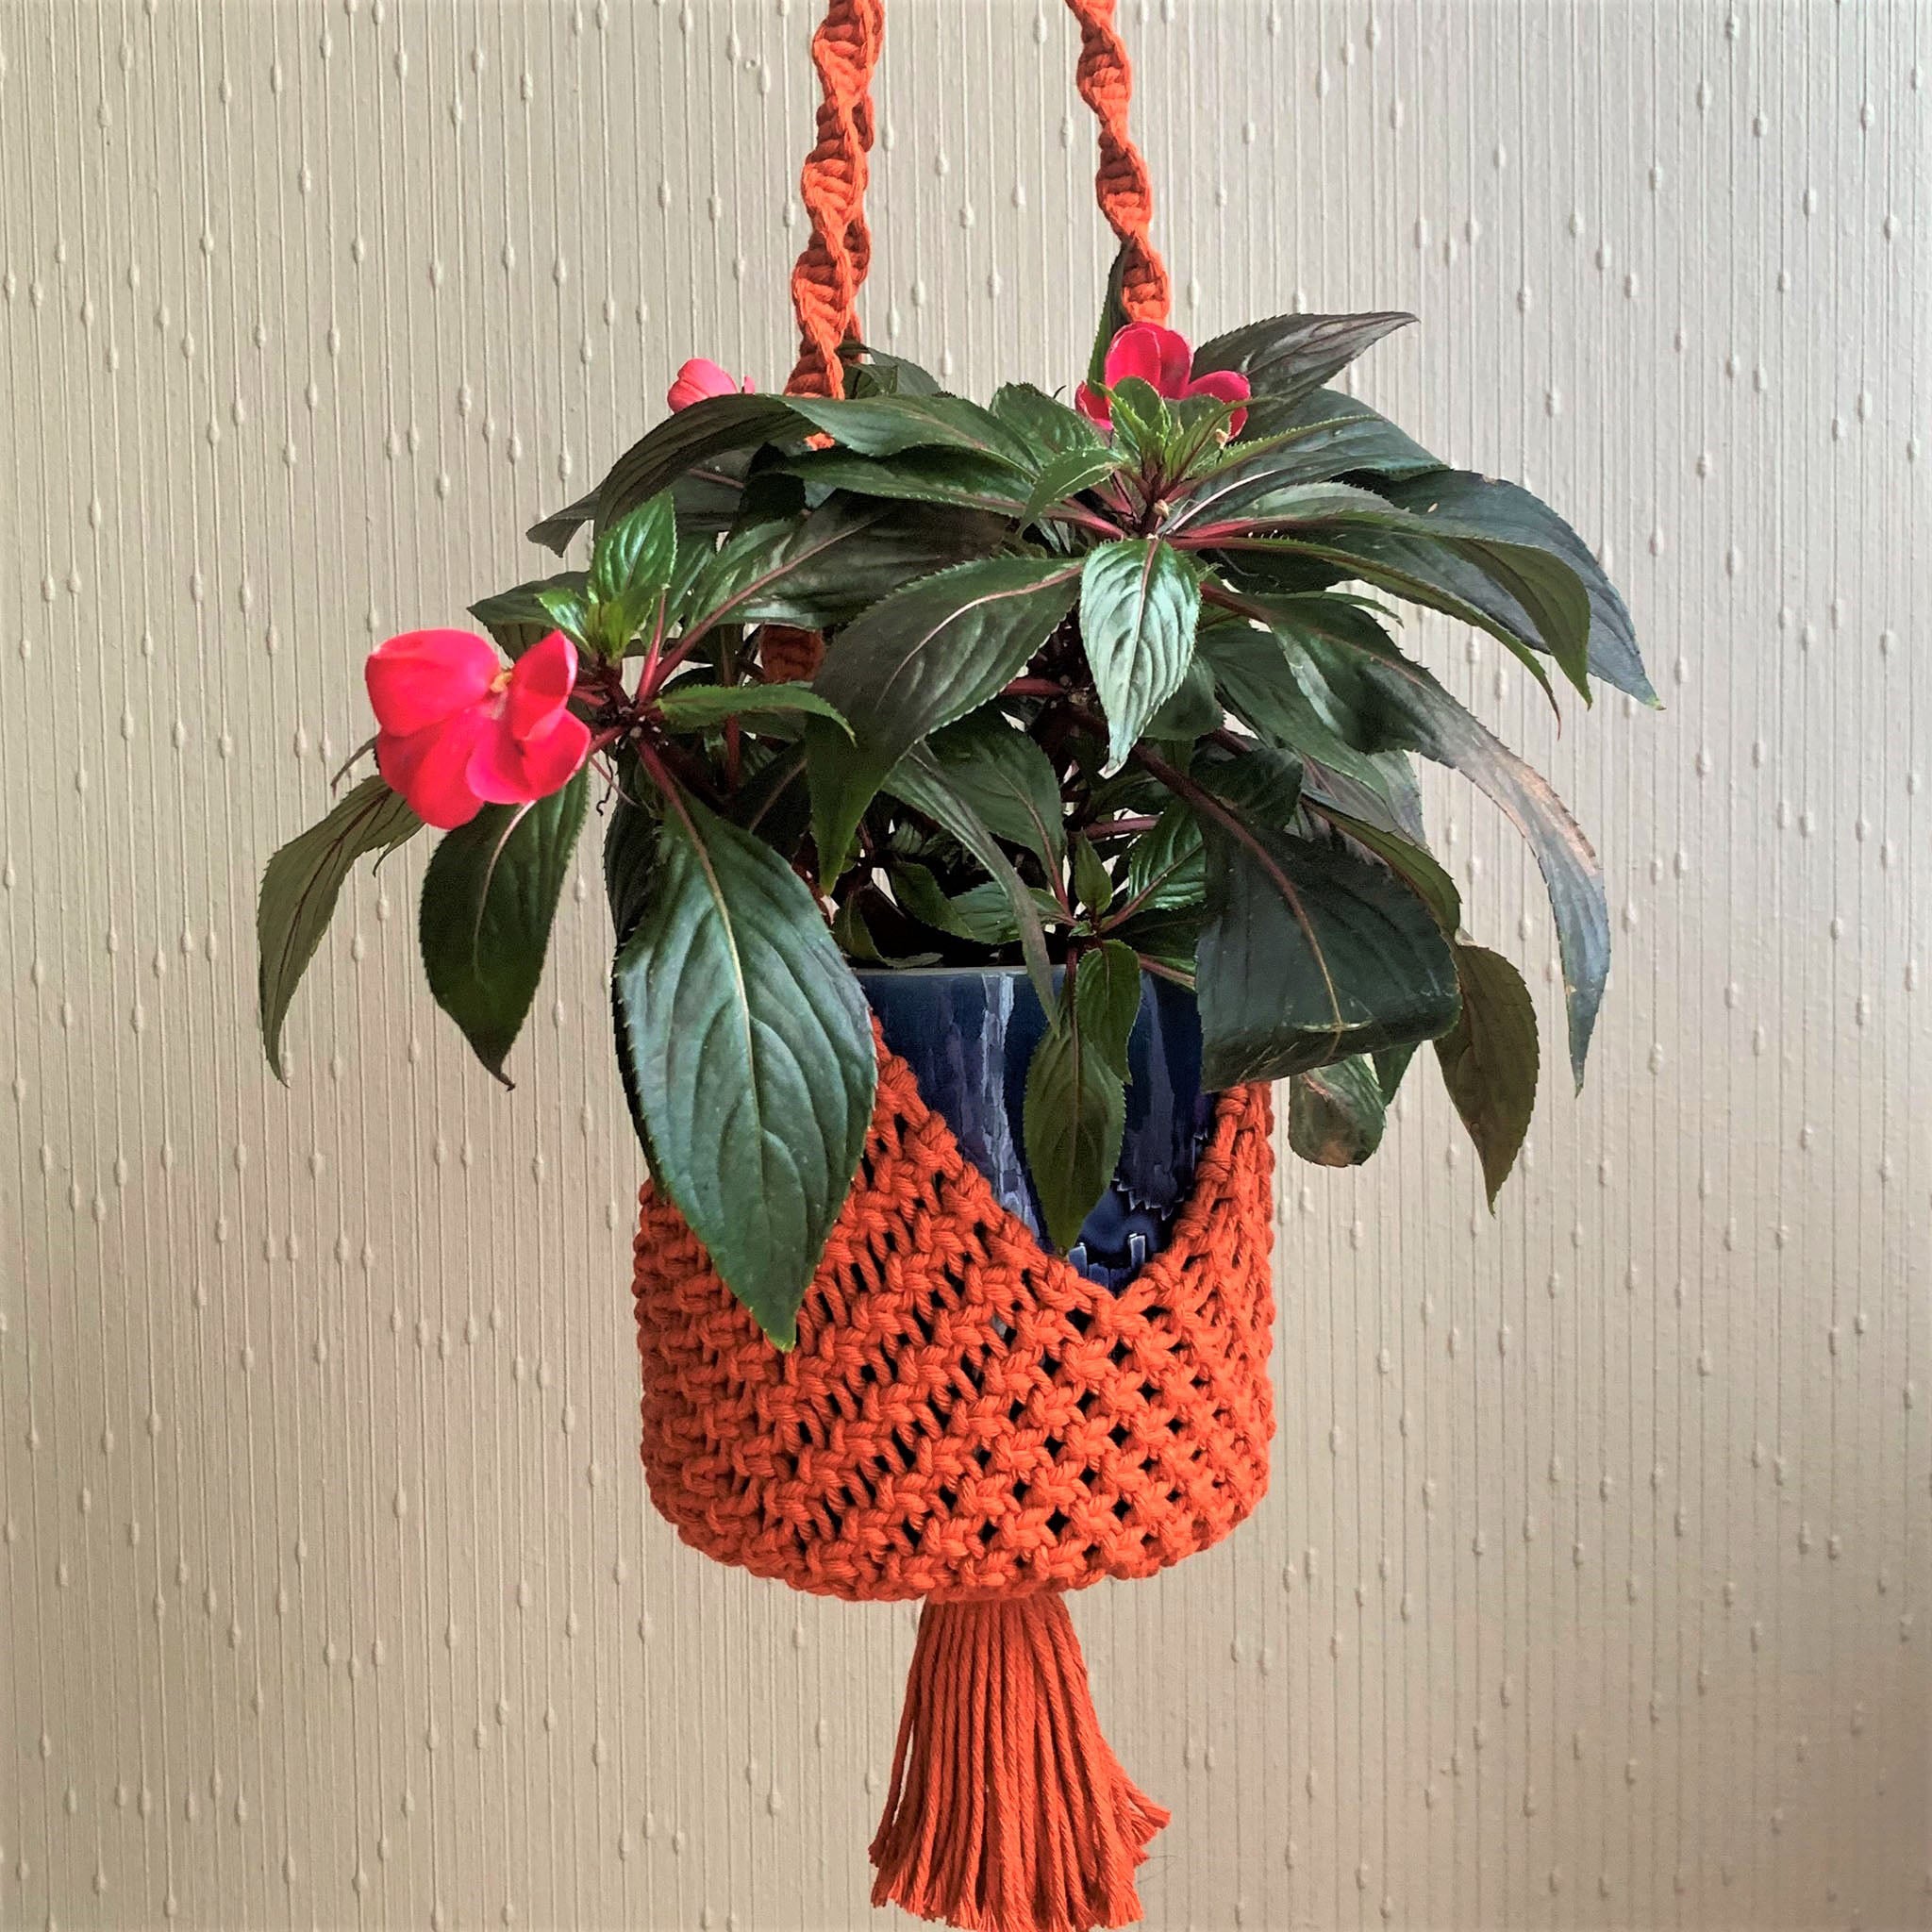 A close up of an orange basket-style macrame plant hanger with a houseplant in it.